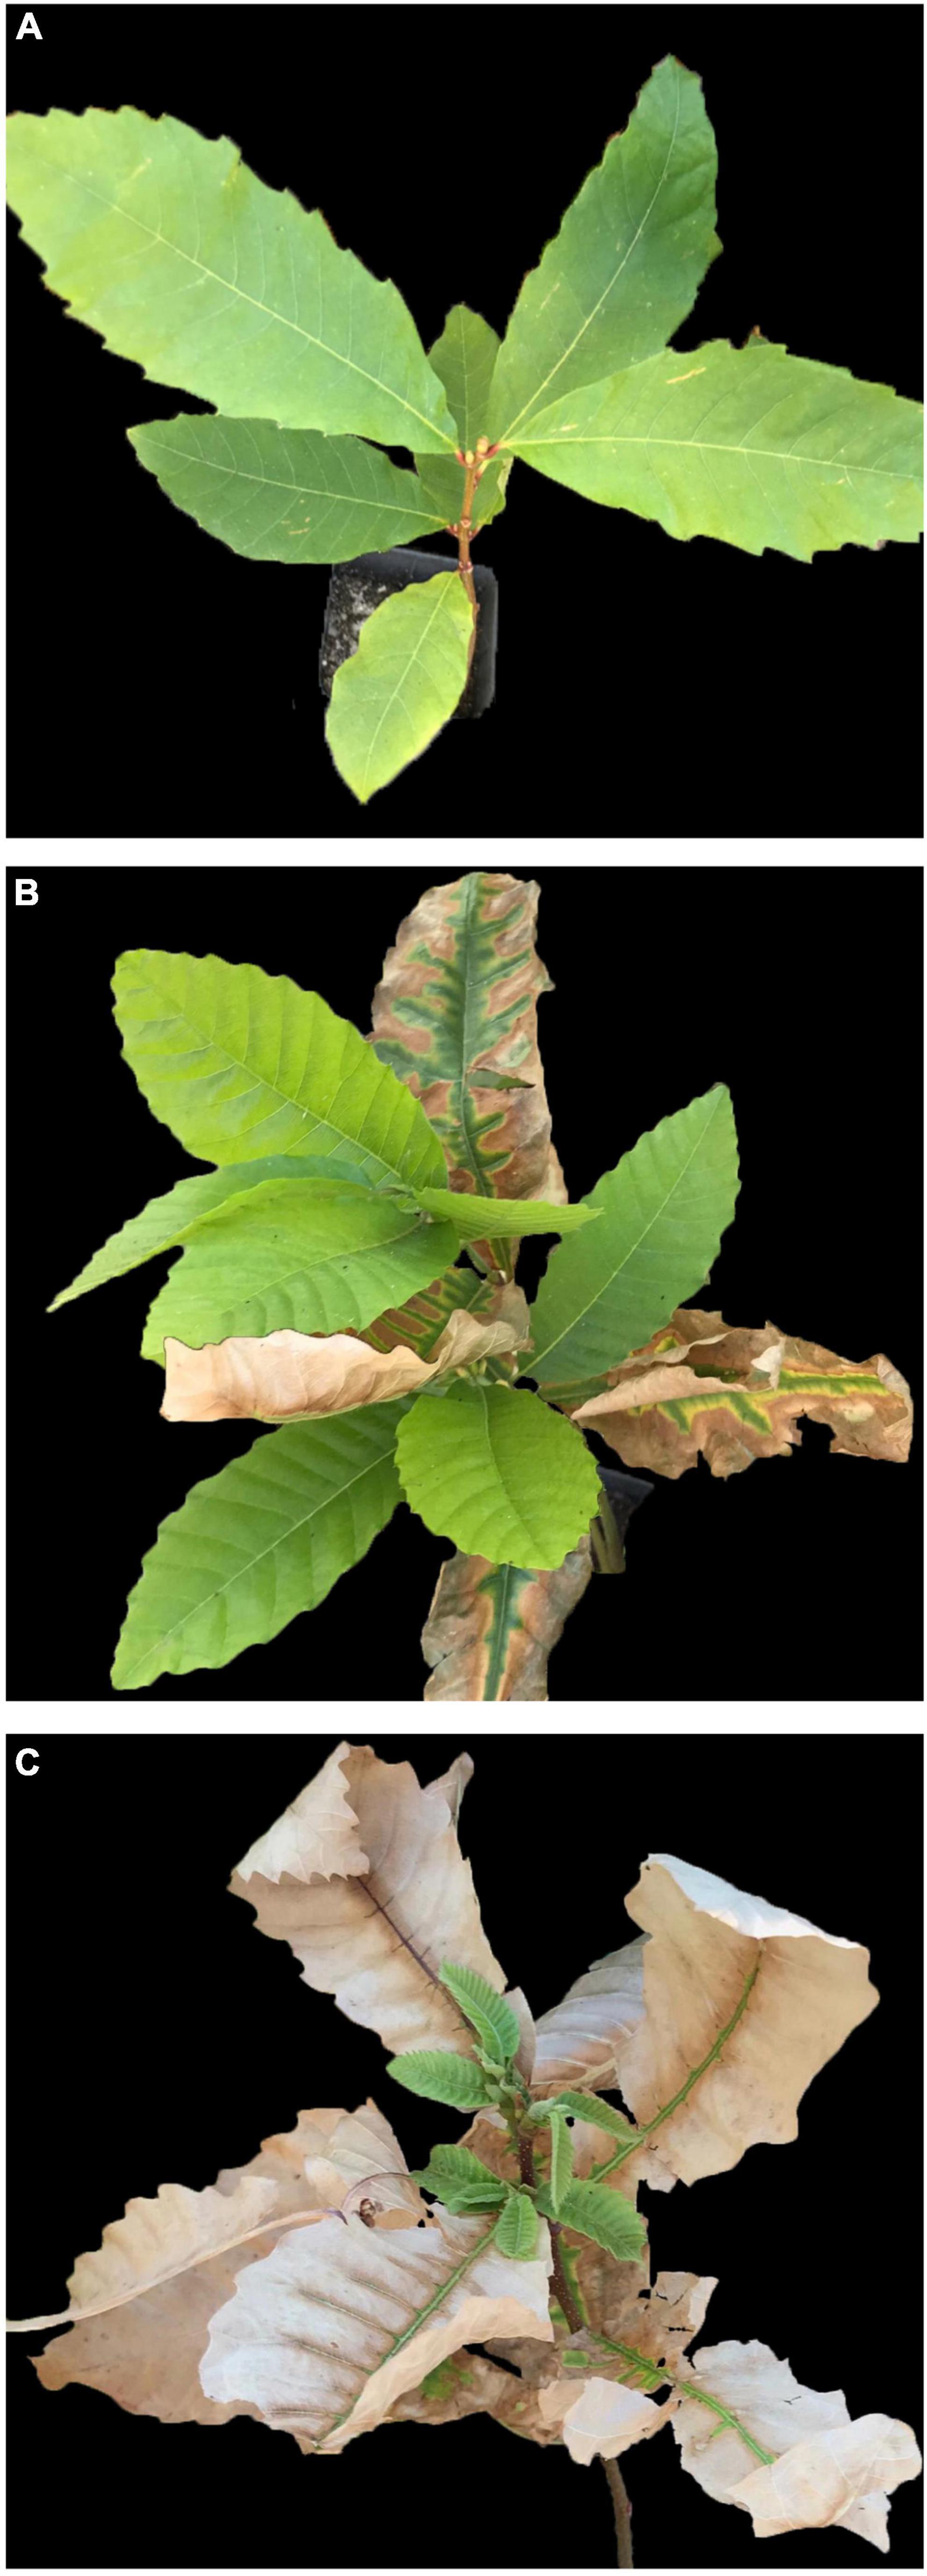 Heat stress and recovery effects on the physiology and biochemistry of Castanea sativa Mill.